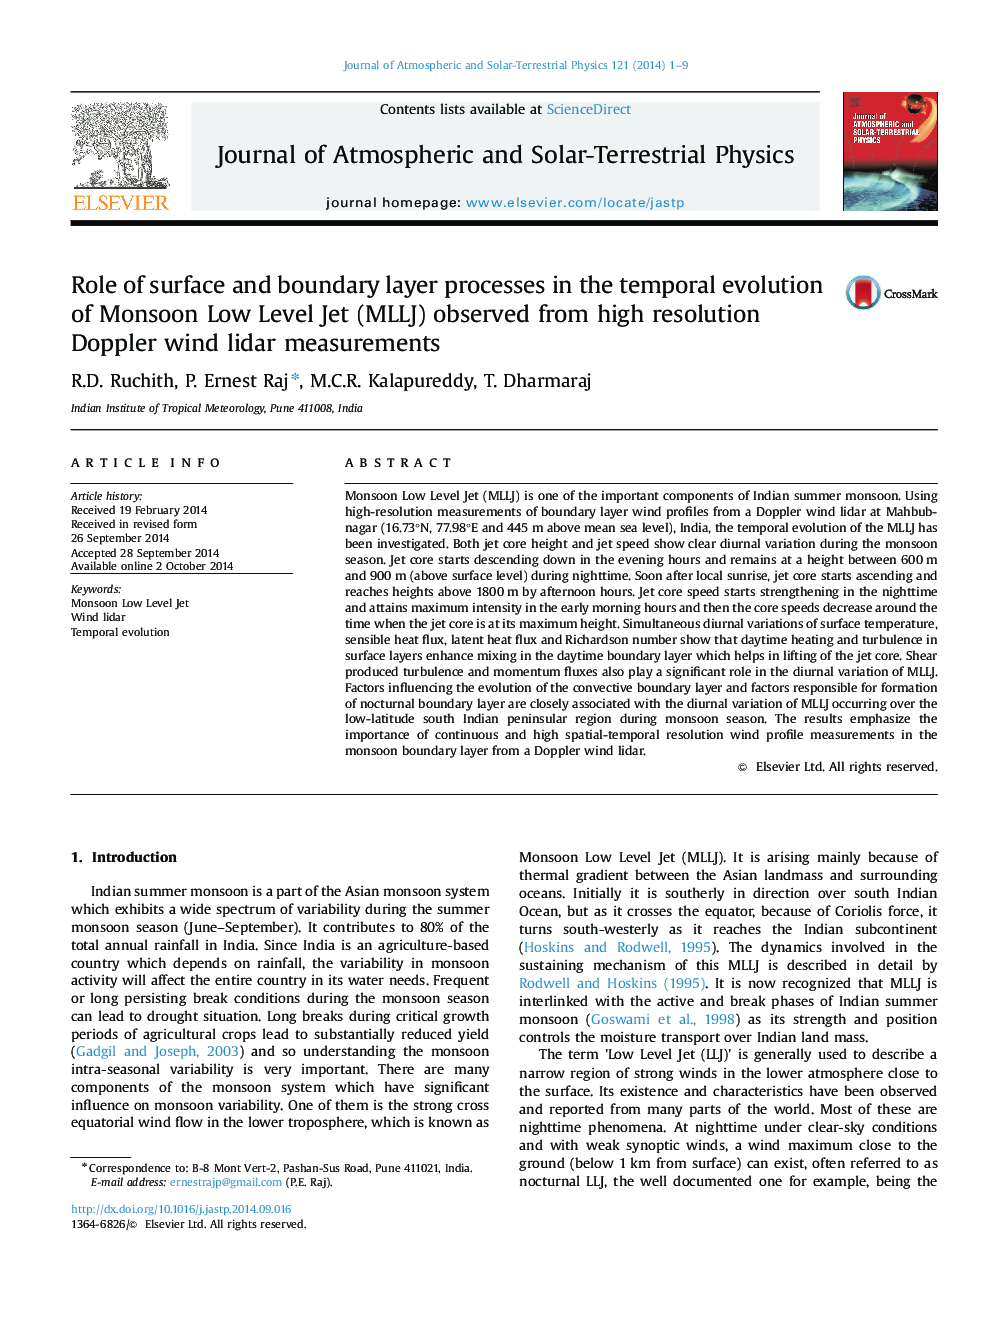 Role of surface and boundary layer processes in the temporal evolution of Monsoon Low Level Jet (MLLJ) observed from high resolution Doppler wind lidar measurements